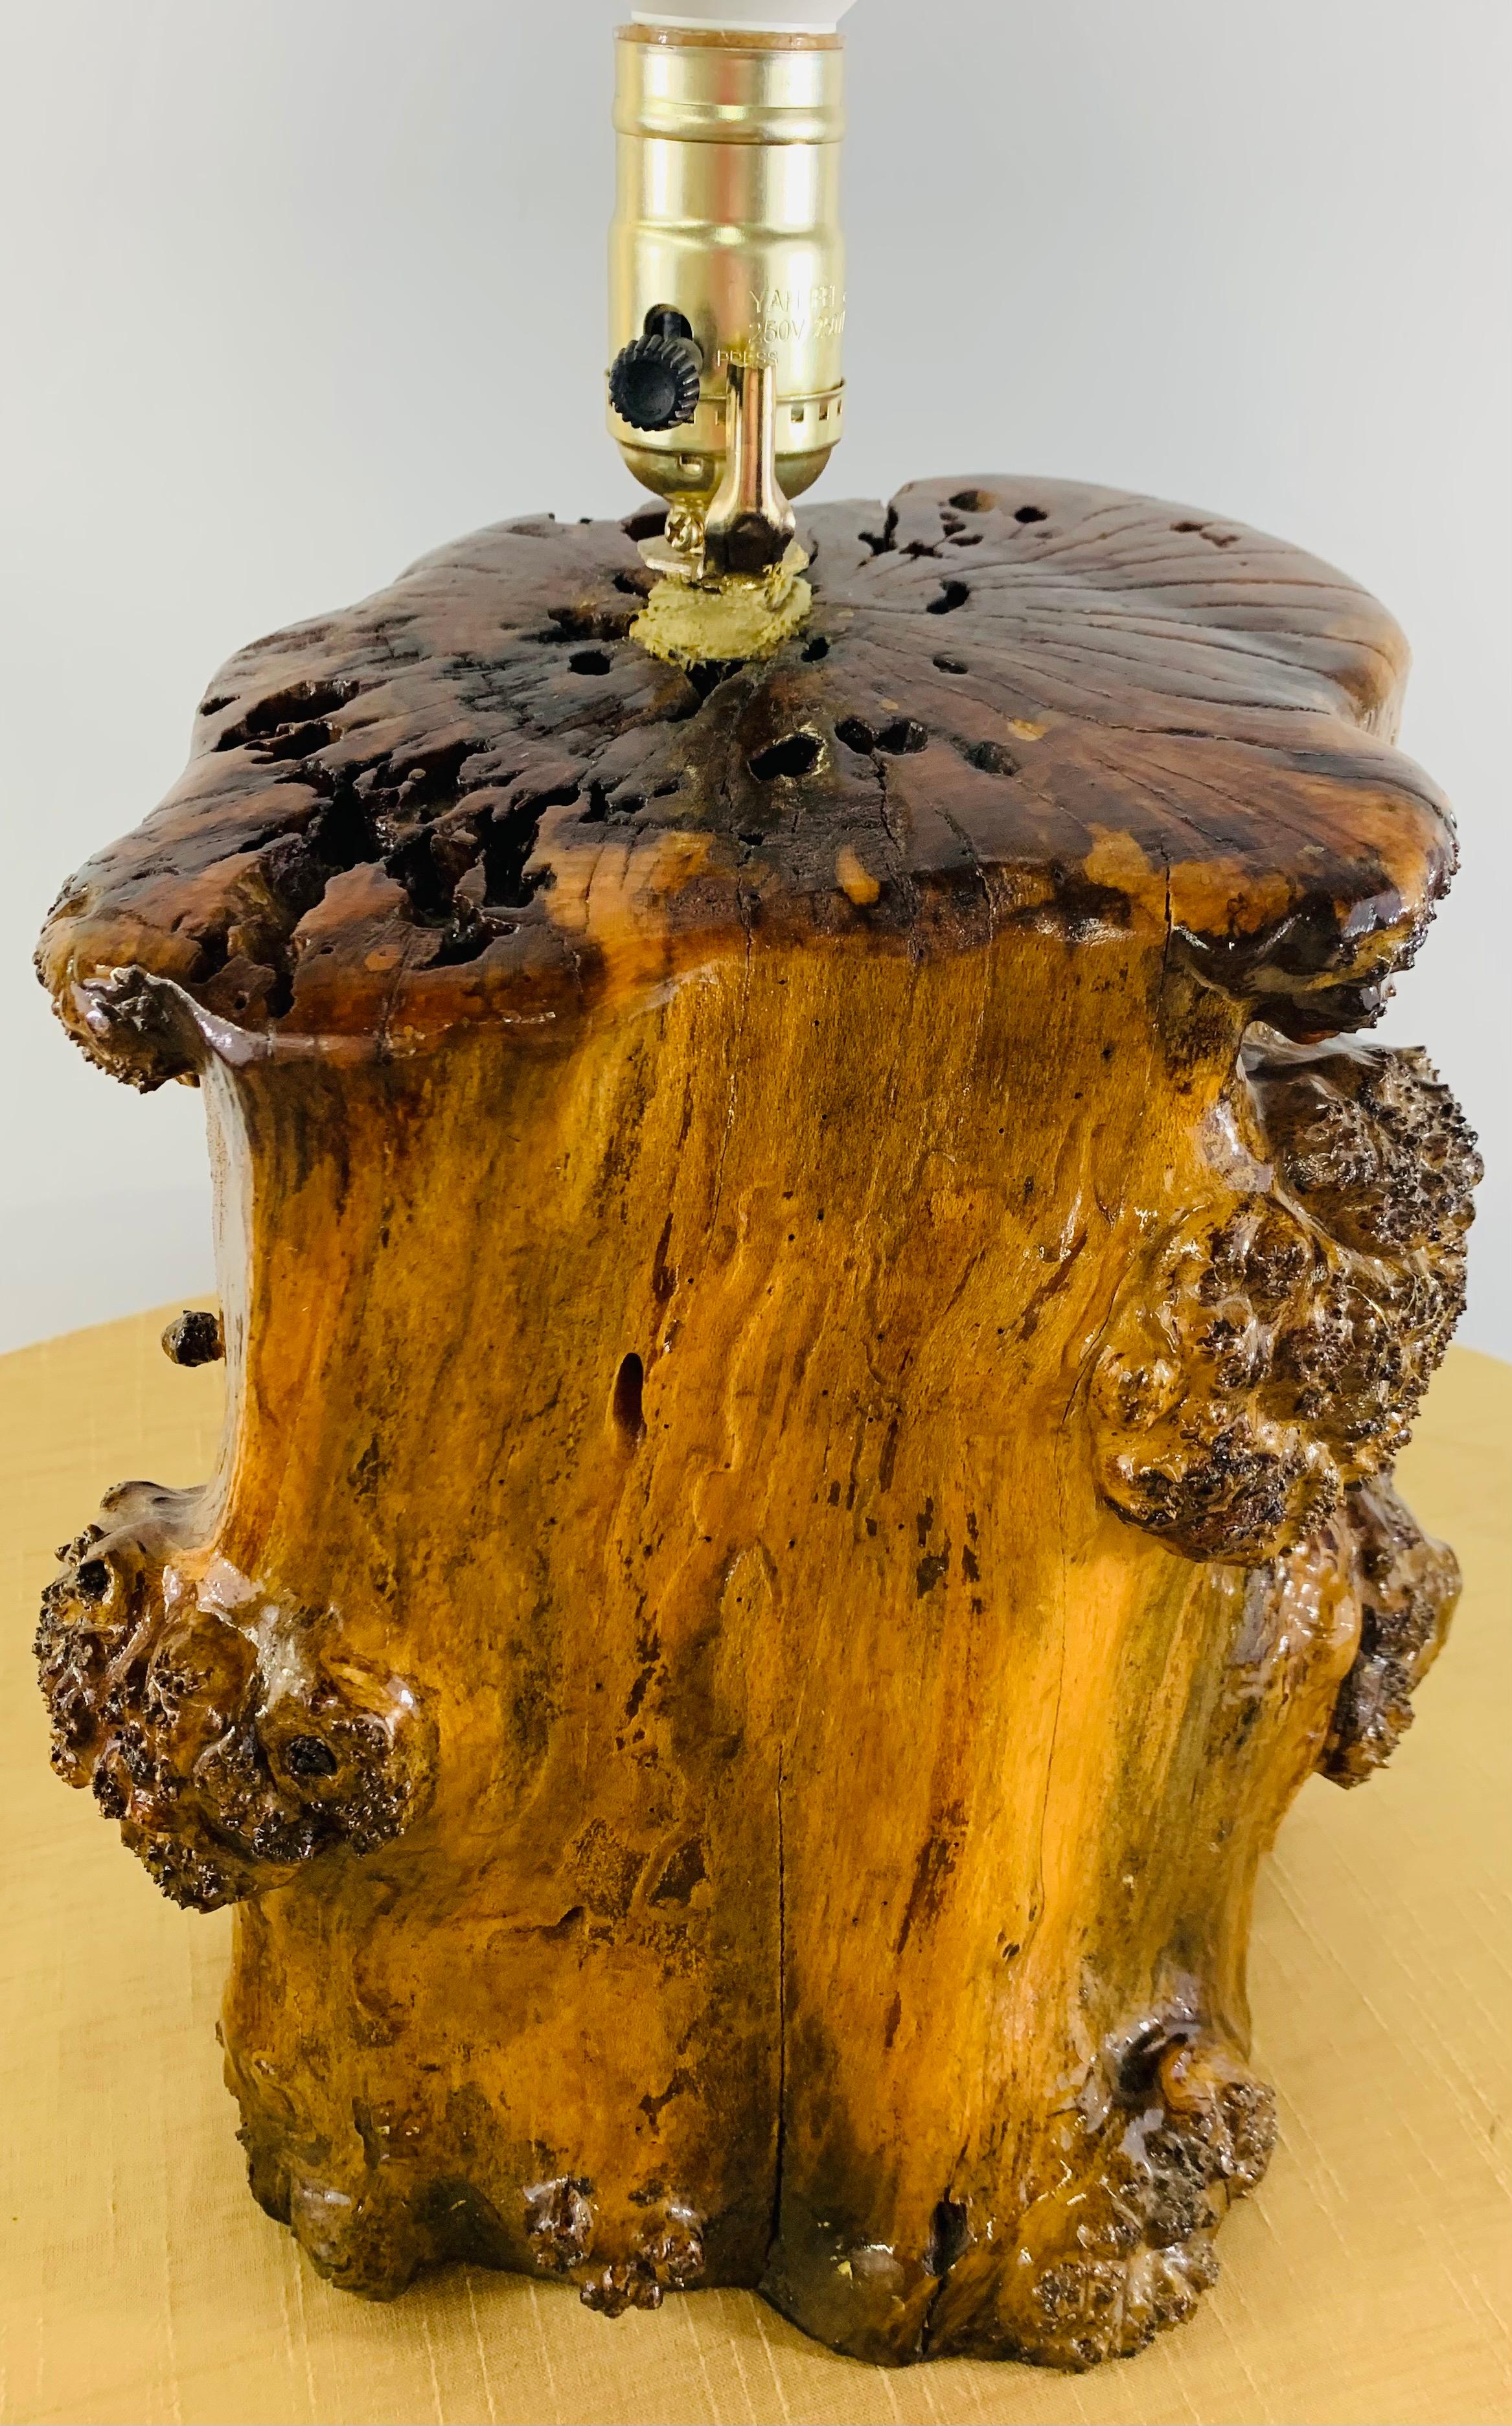 A one of a kind Maple wood log rustic style table lamp. The Lamp base shows natural texture and patterns and is lacquered for a shiny look. The table Lamp will bring nature to your living space while displaying natural beauty and imperfections at